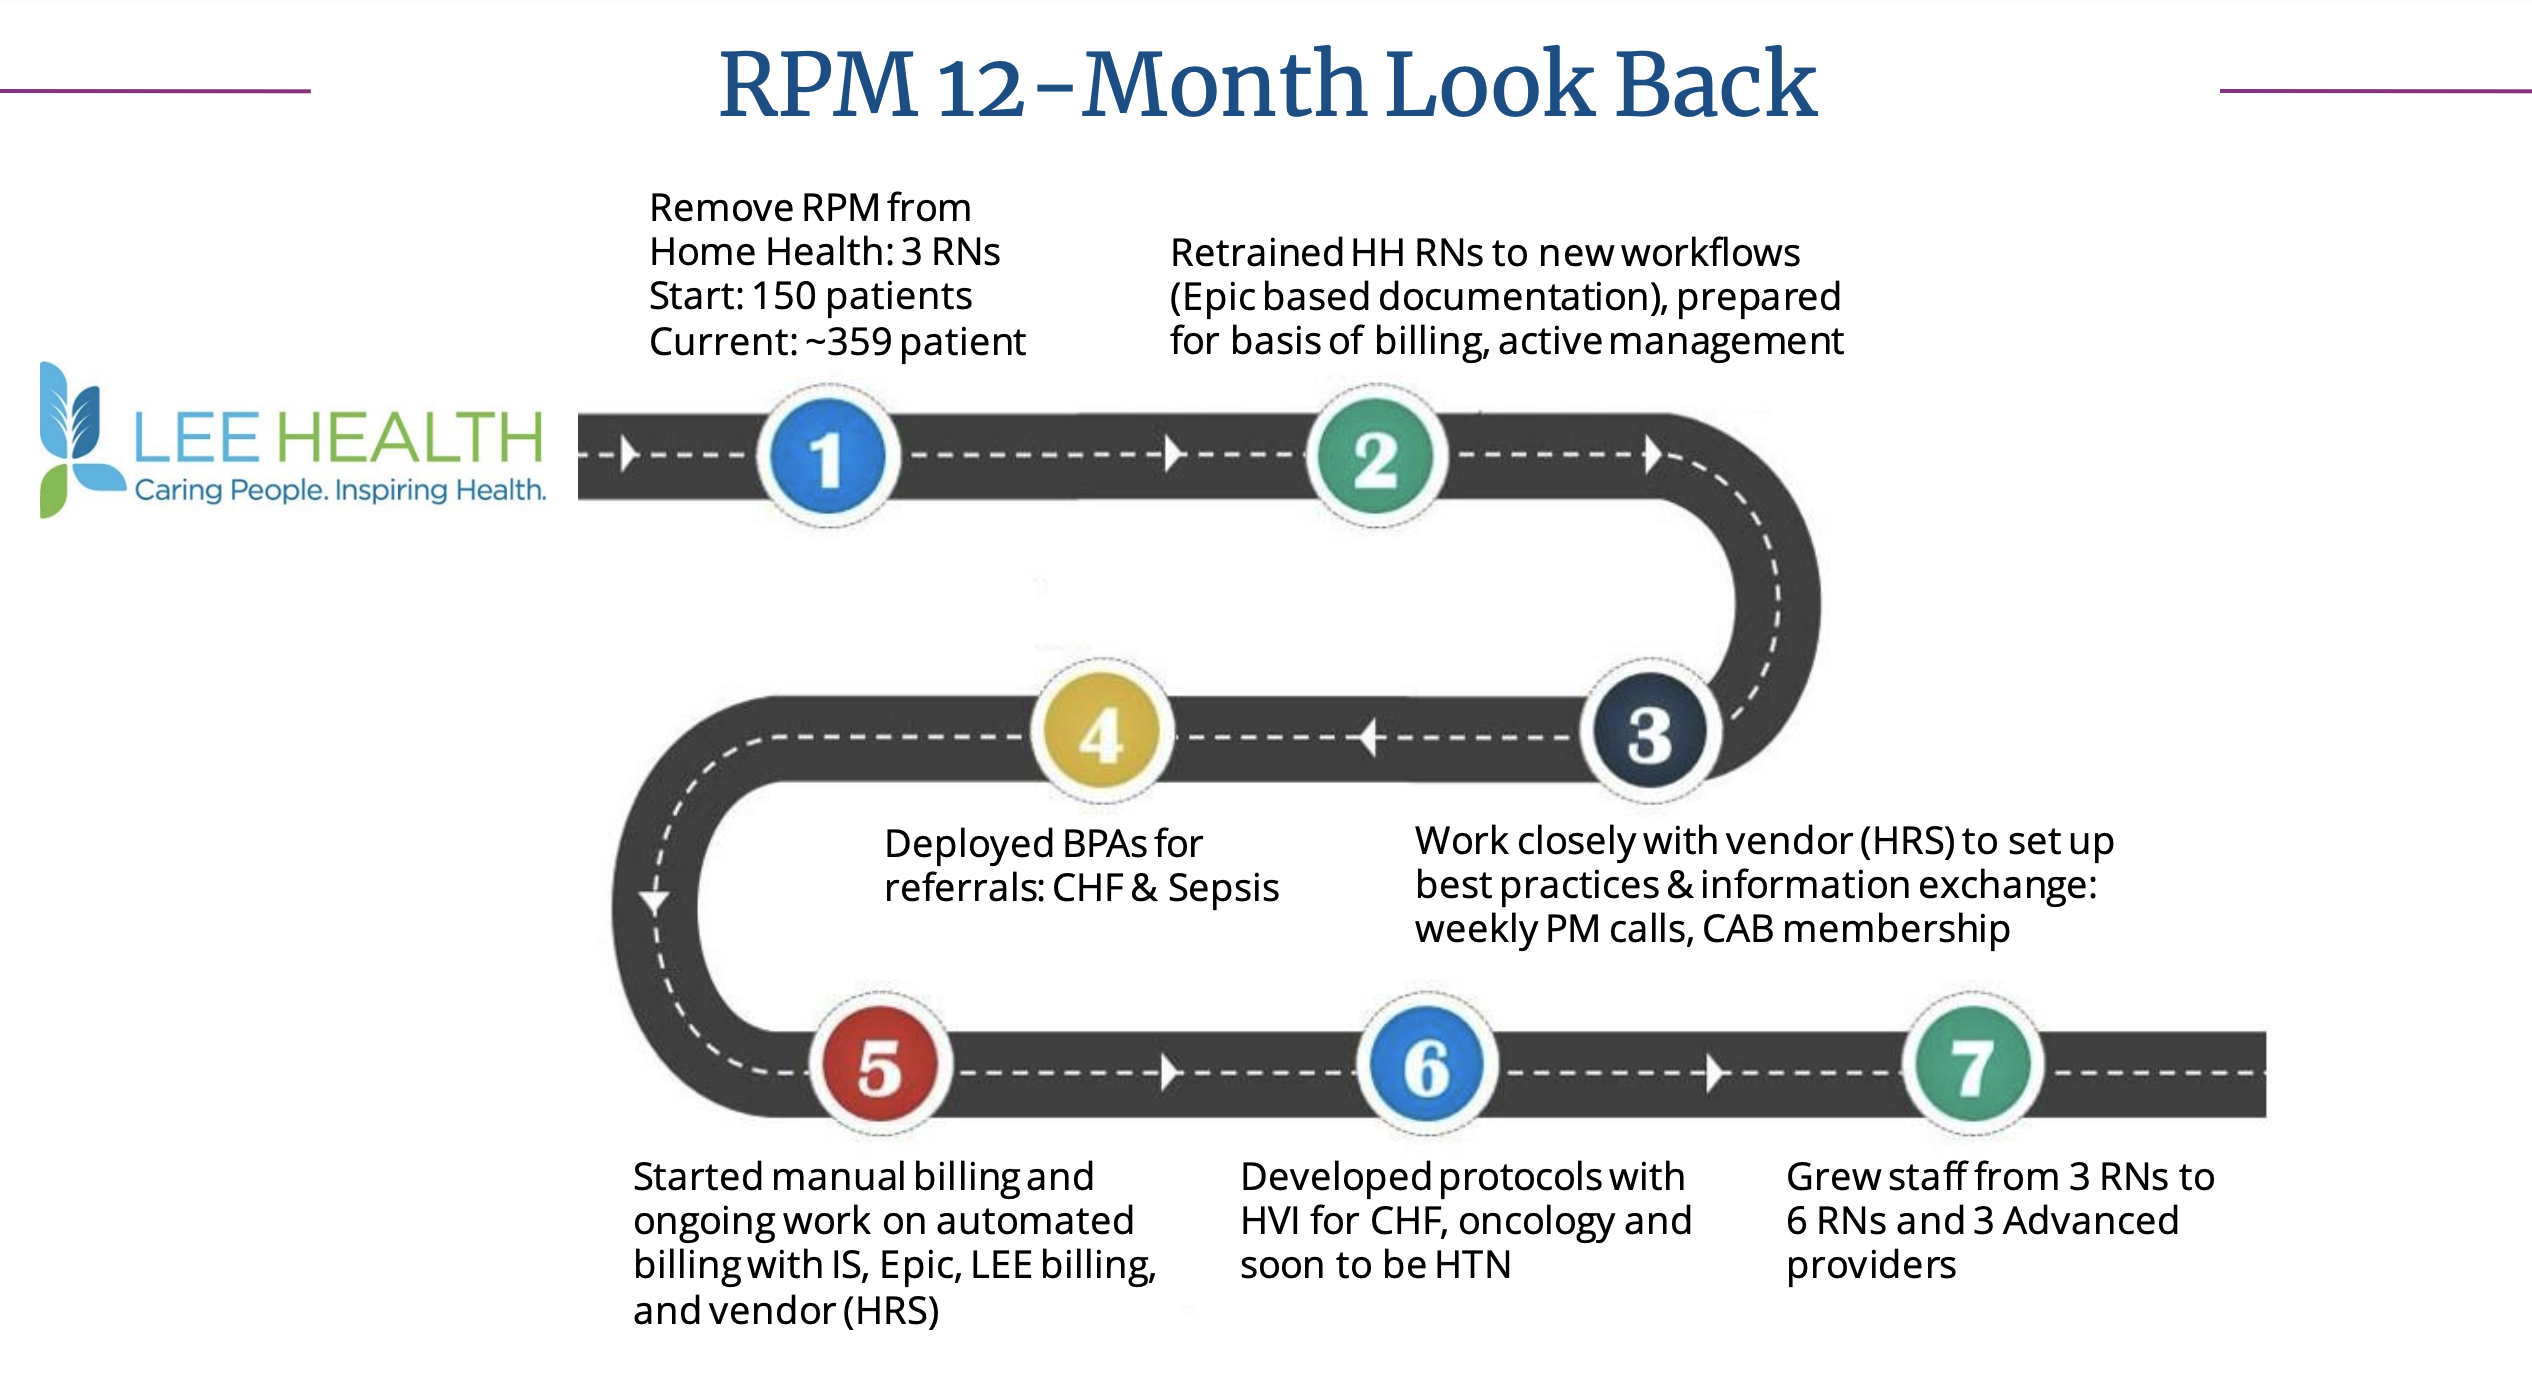 A slide from the webinar presentation shows key milestones from the last 12 months of transformation for Lee Health's RPM program